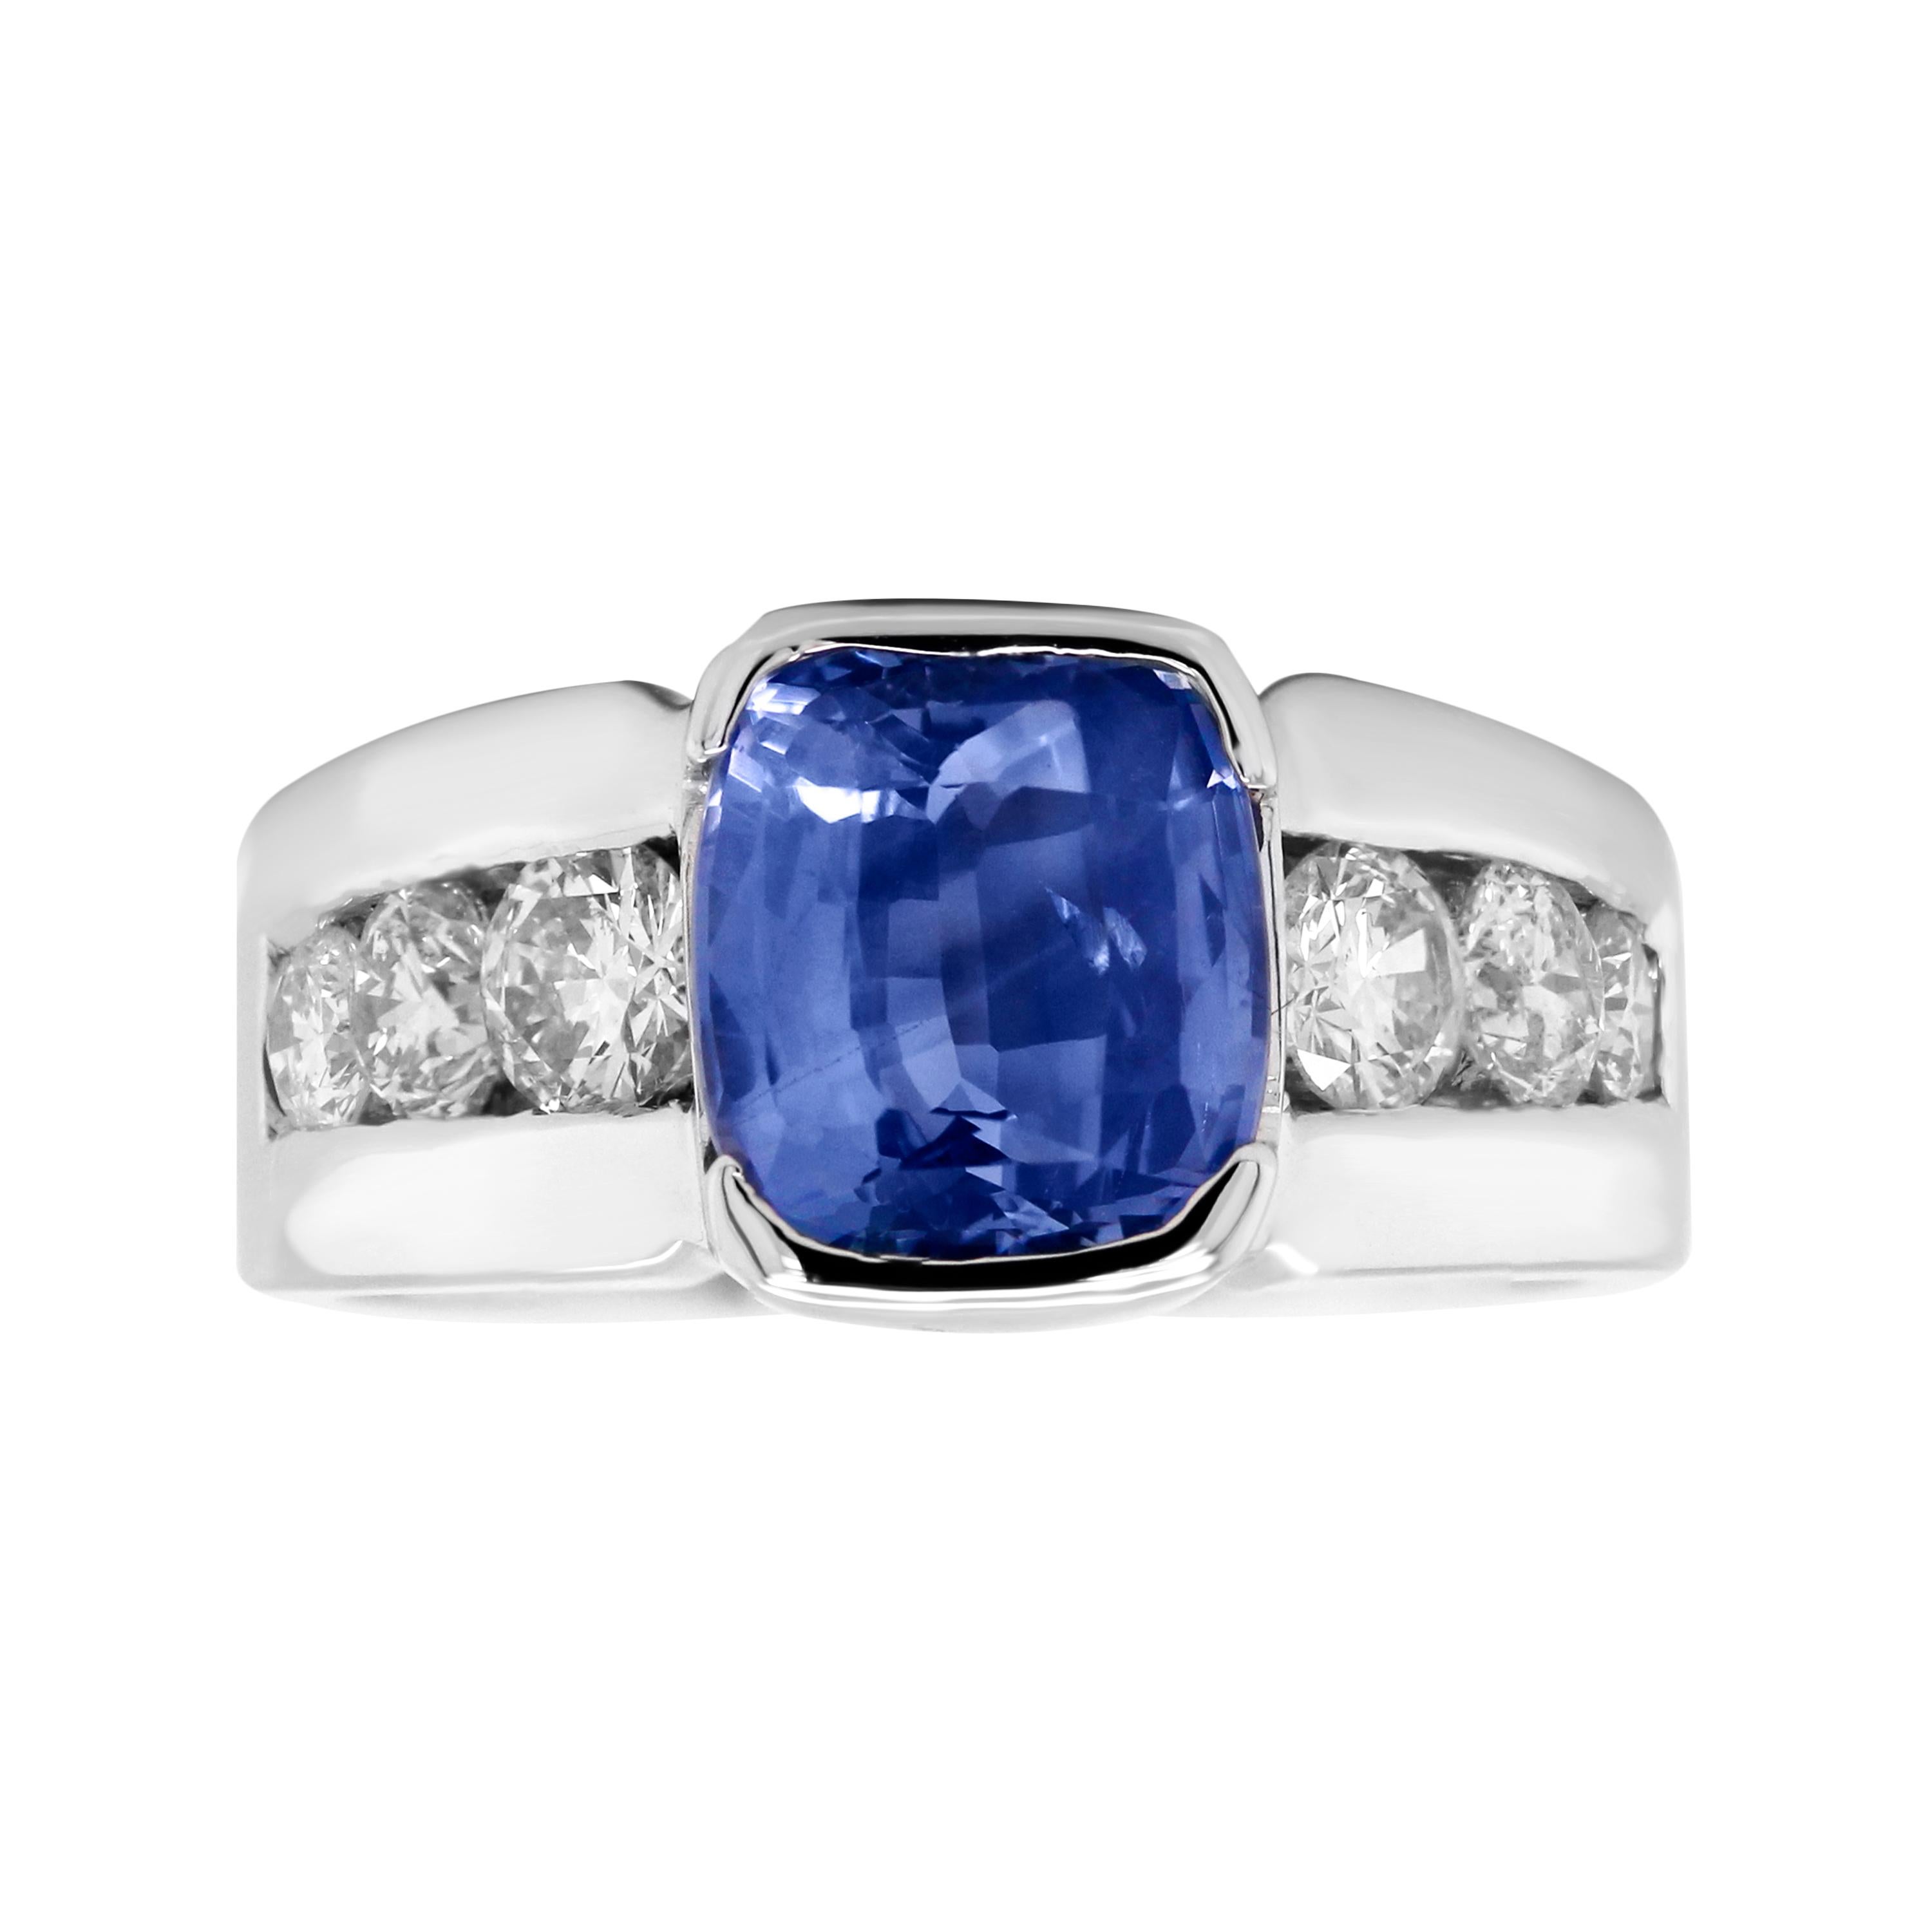 AGL Certified 5.21 Carat Cushion Cut No Heat Ceylon Blue Sapphire Diamond 14K White Gold Ring

This gorgeous ring features three diamonds on each side of the ring.

5.21 carat, Cushion Cut, No Heat Sapphire from Ceylon. AGL Certified (Certificate in